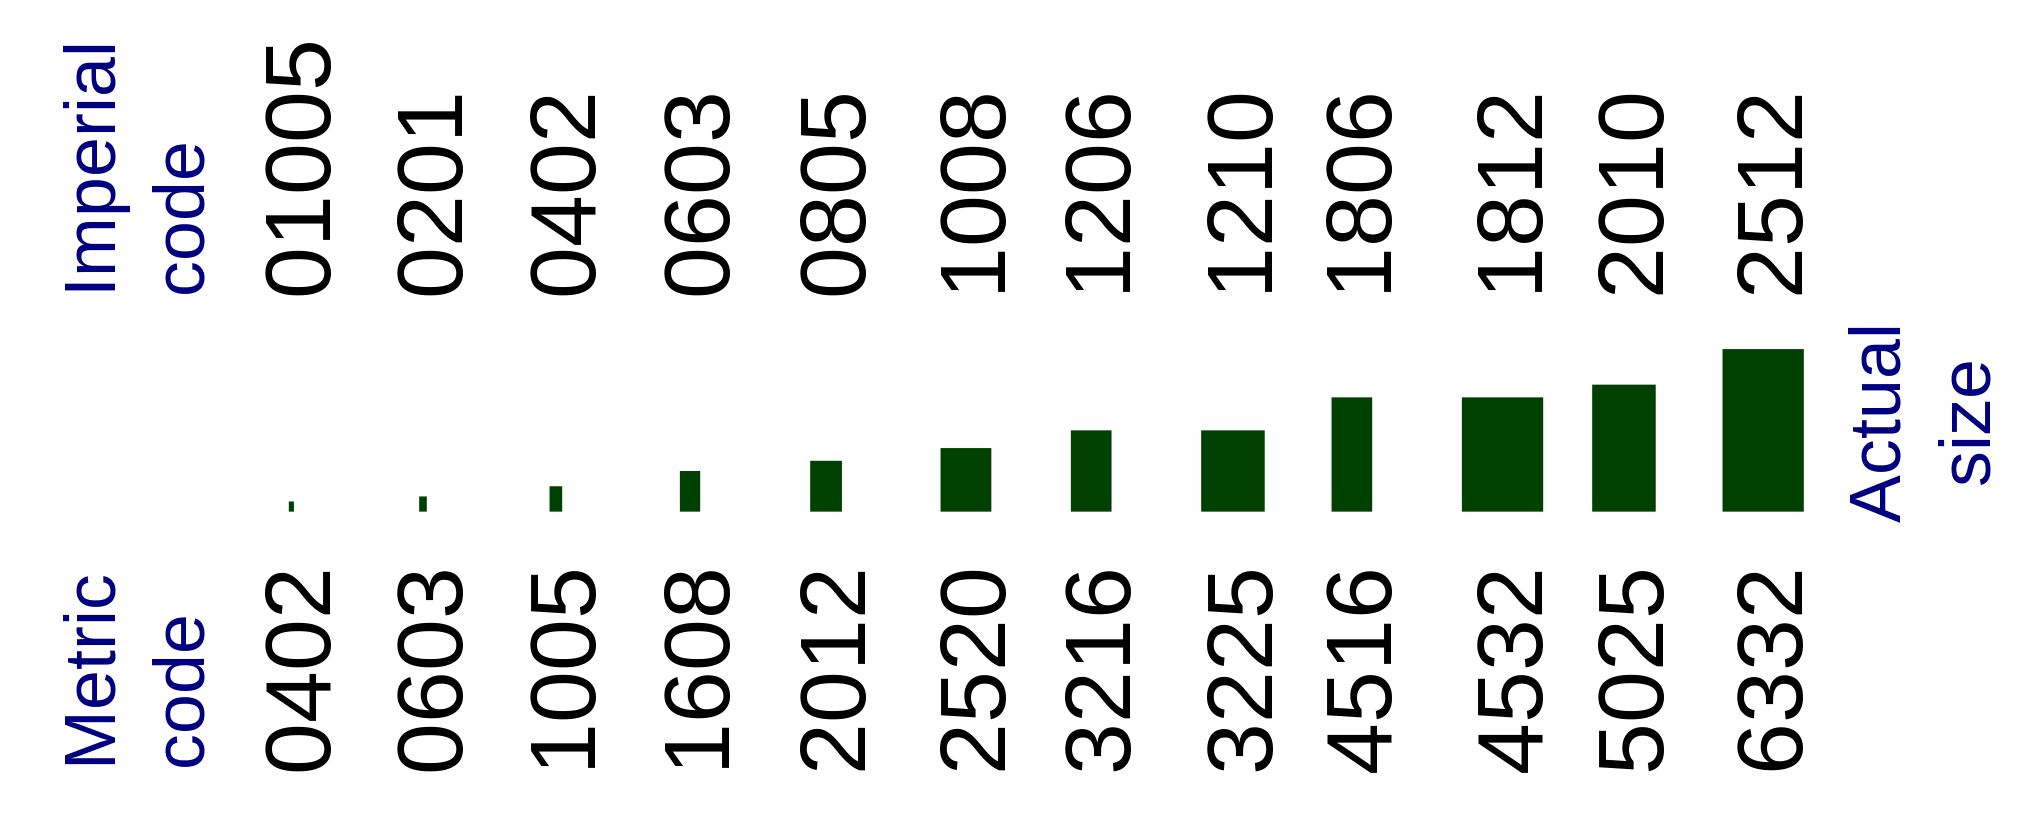 smd components size